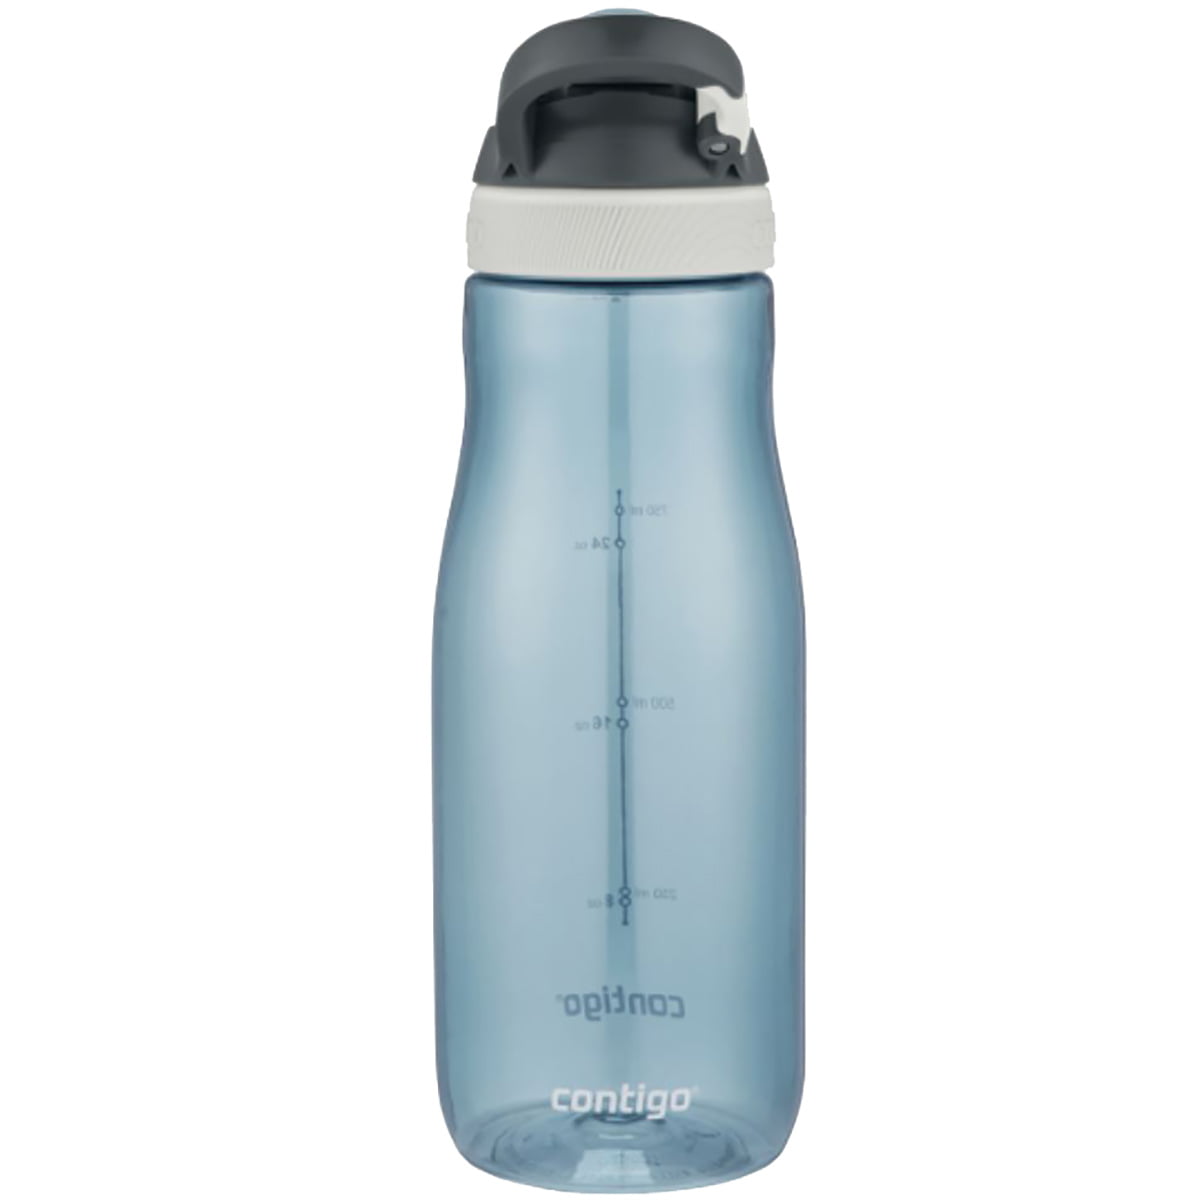 Contigo AUTOSEAL Water Bottle, 32oz, Red,  price tracker / tracking,   price history charts,  price watches,  price drop alerts